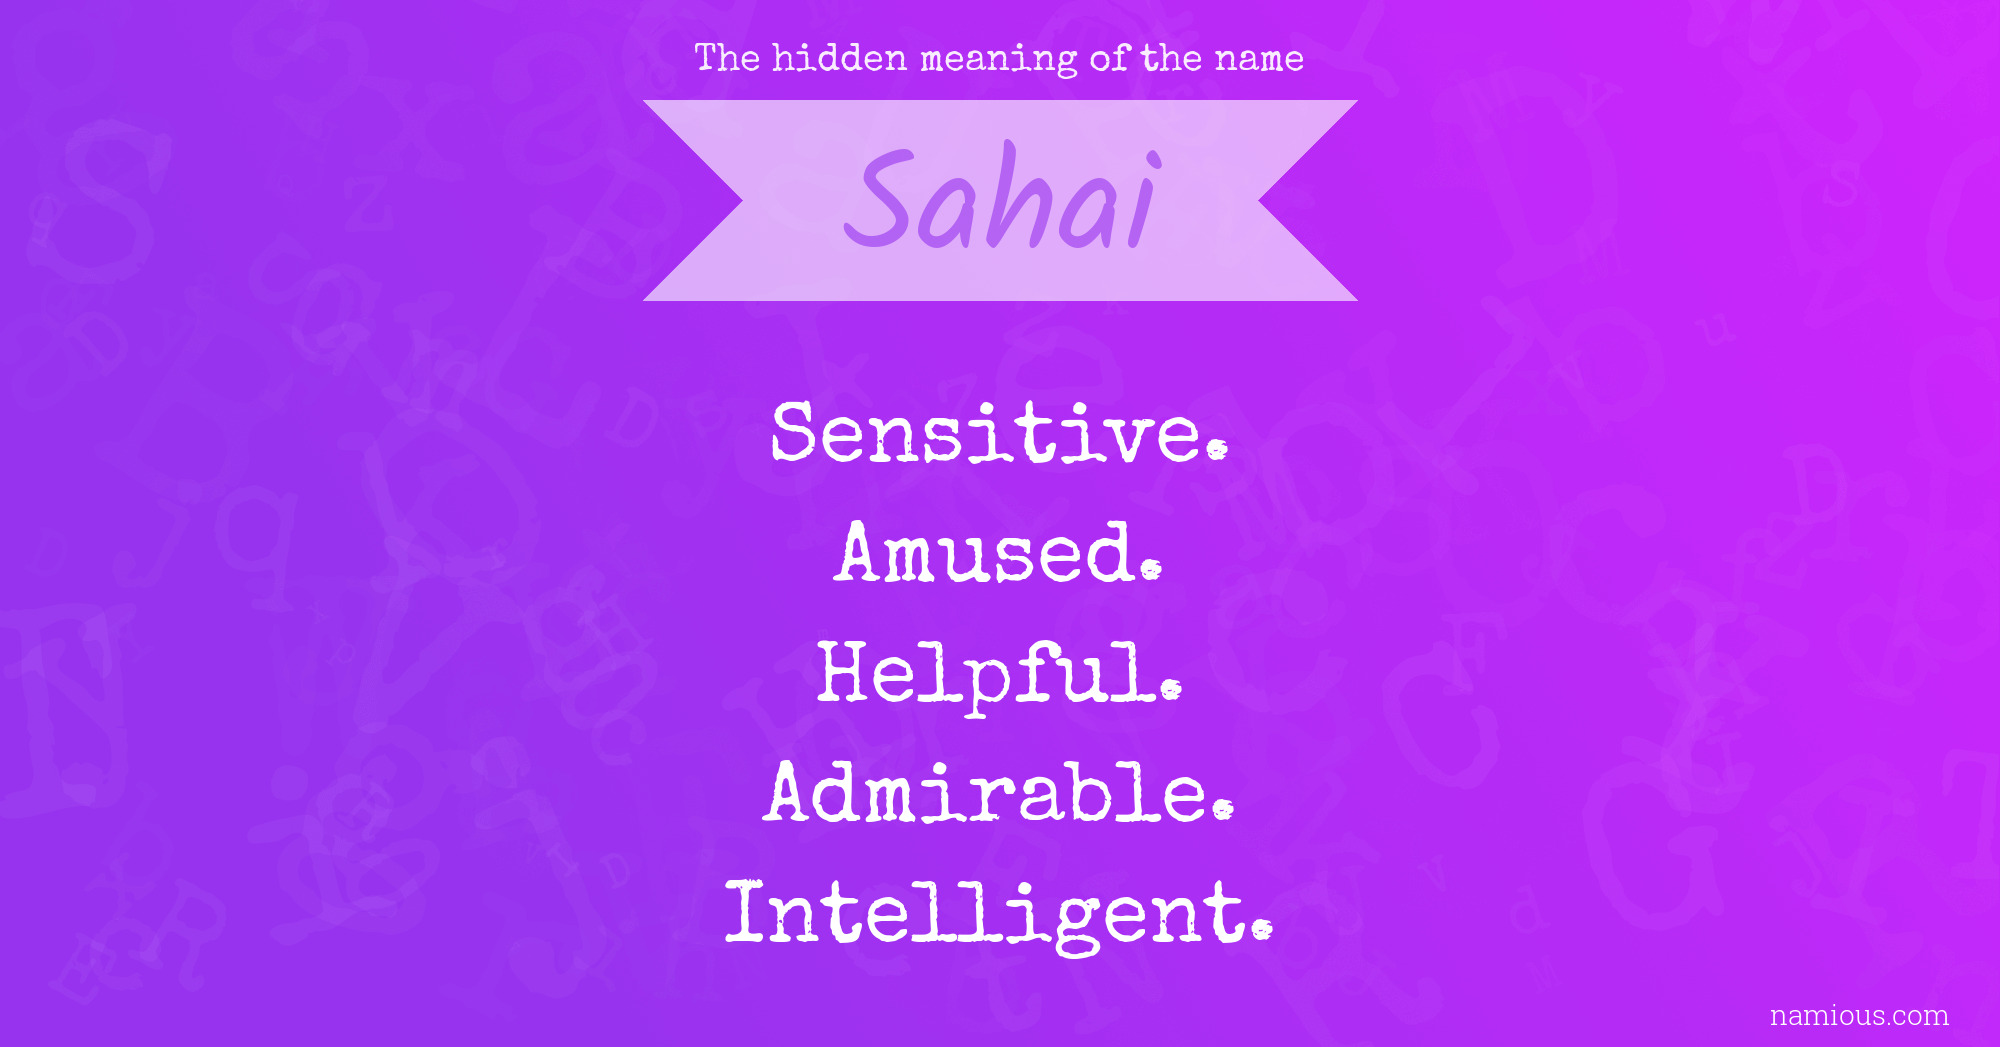 The hidden meaning of the name Sahai